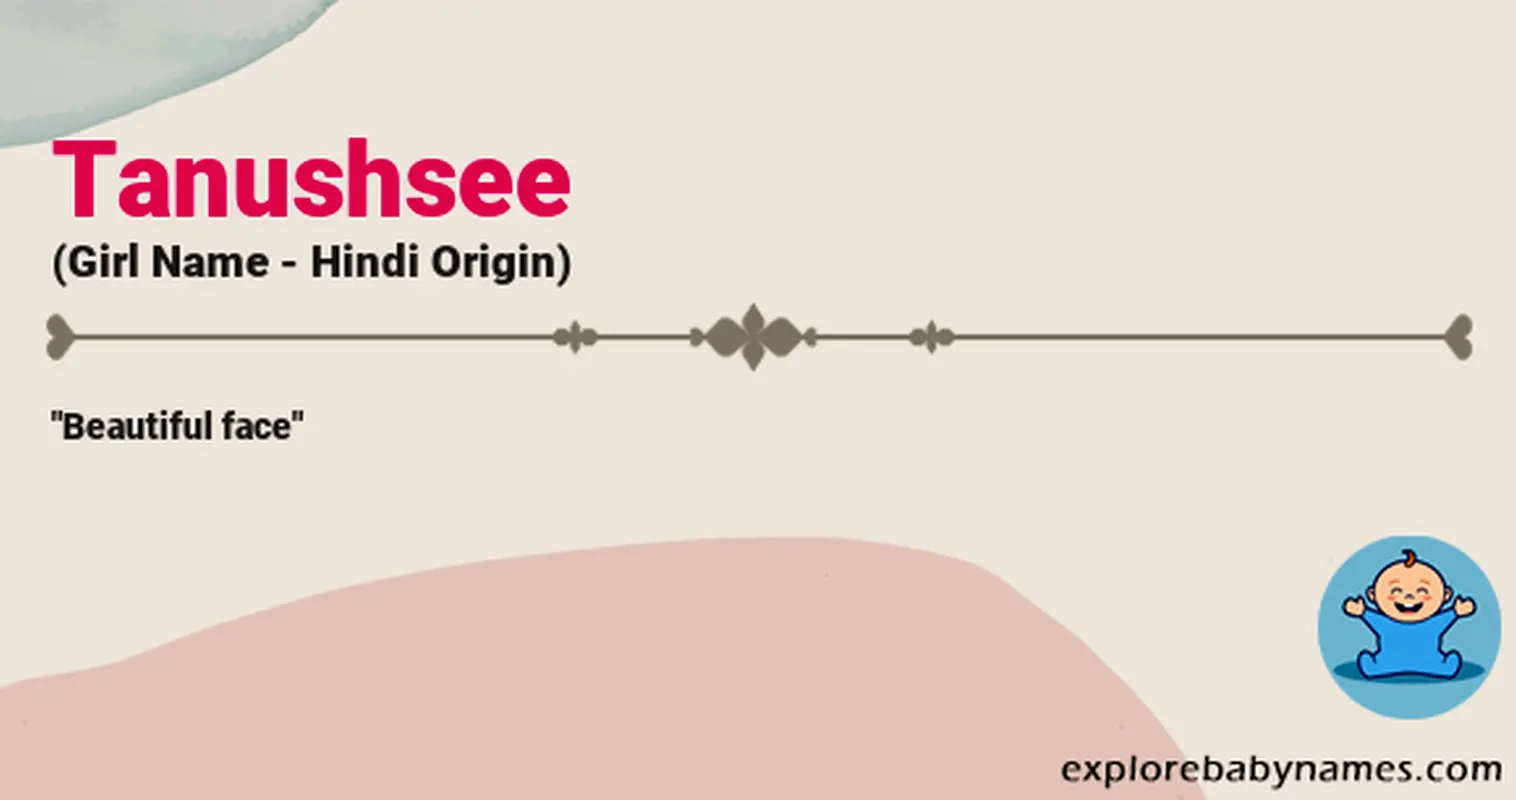 Meaning of Tanushsee